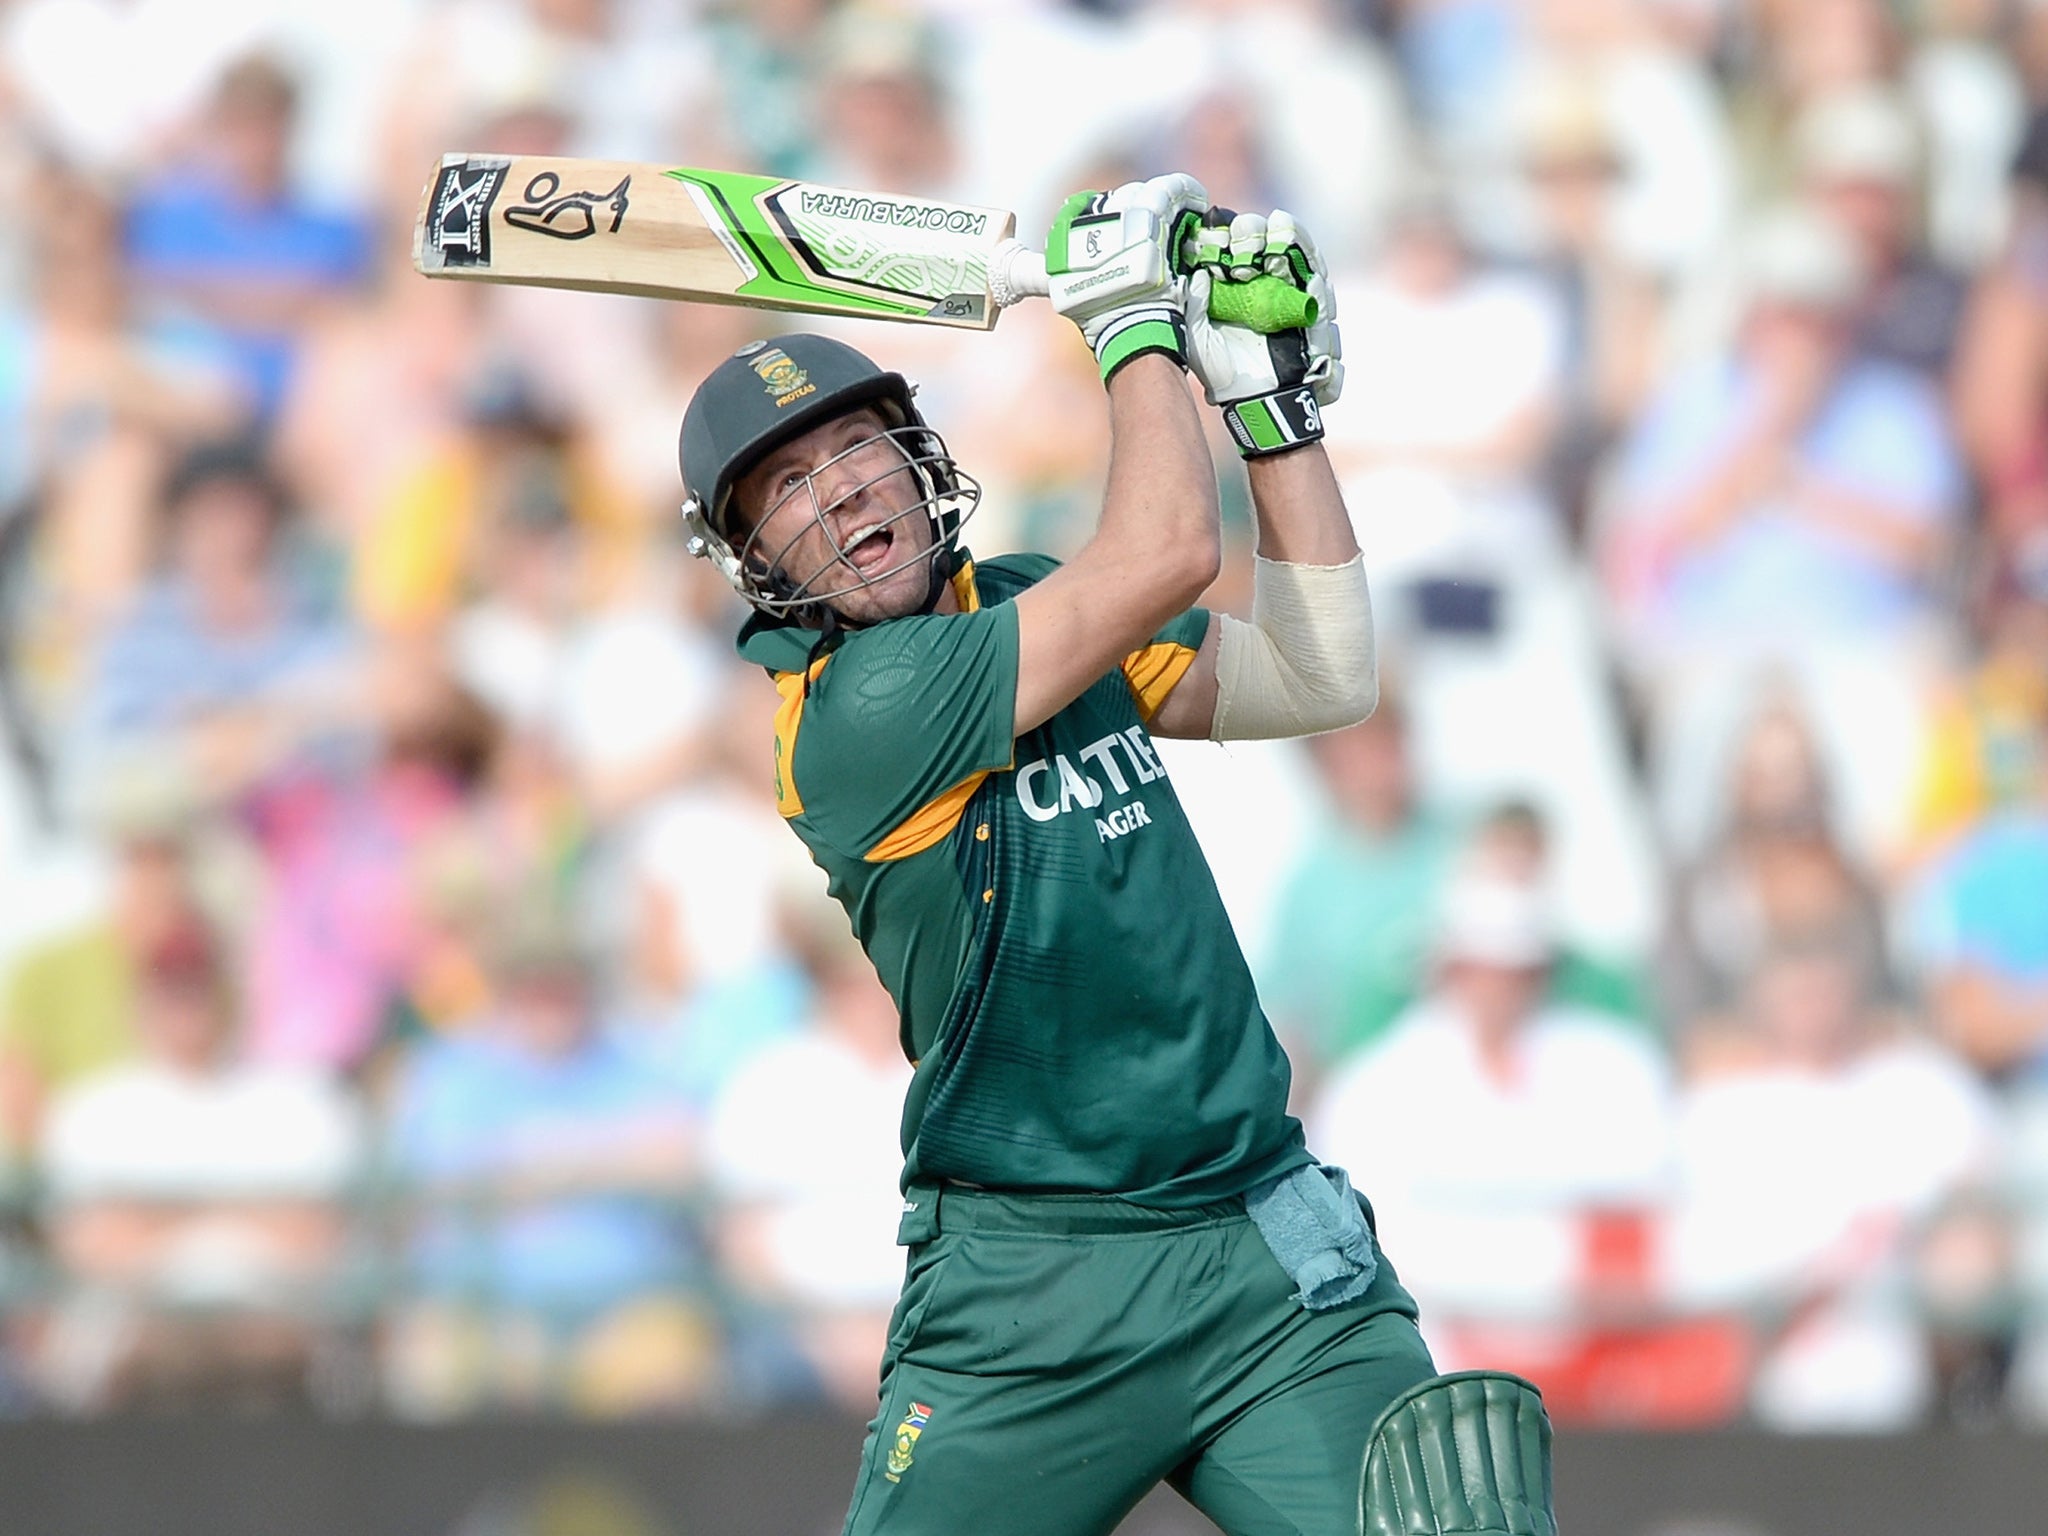 South Africa batsman AB de Villiers is one of the best ODI players of a generation